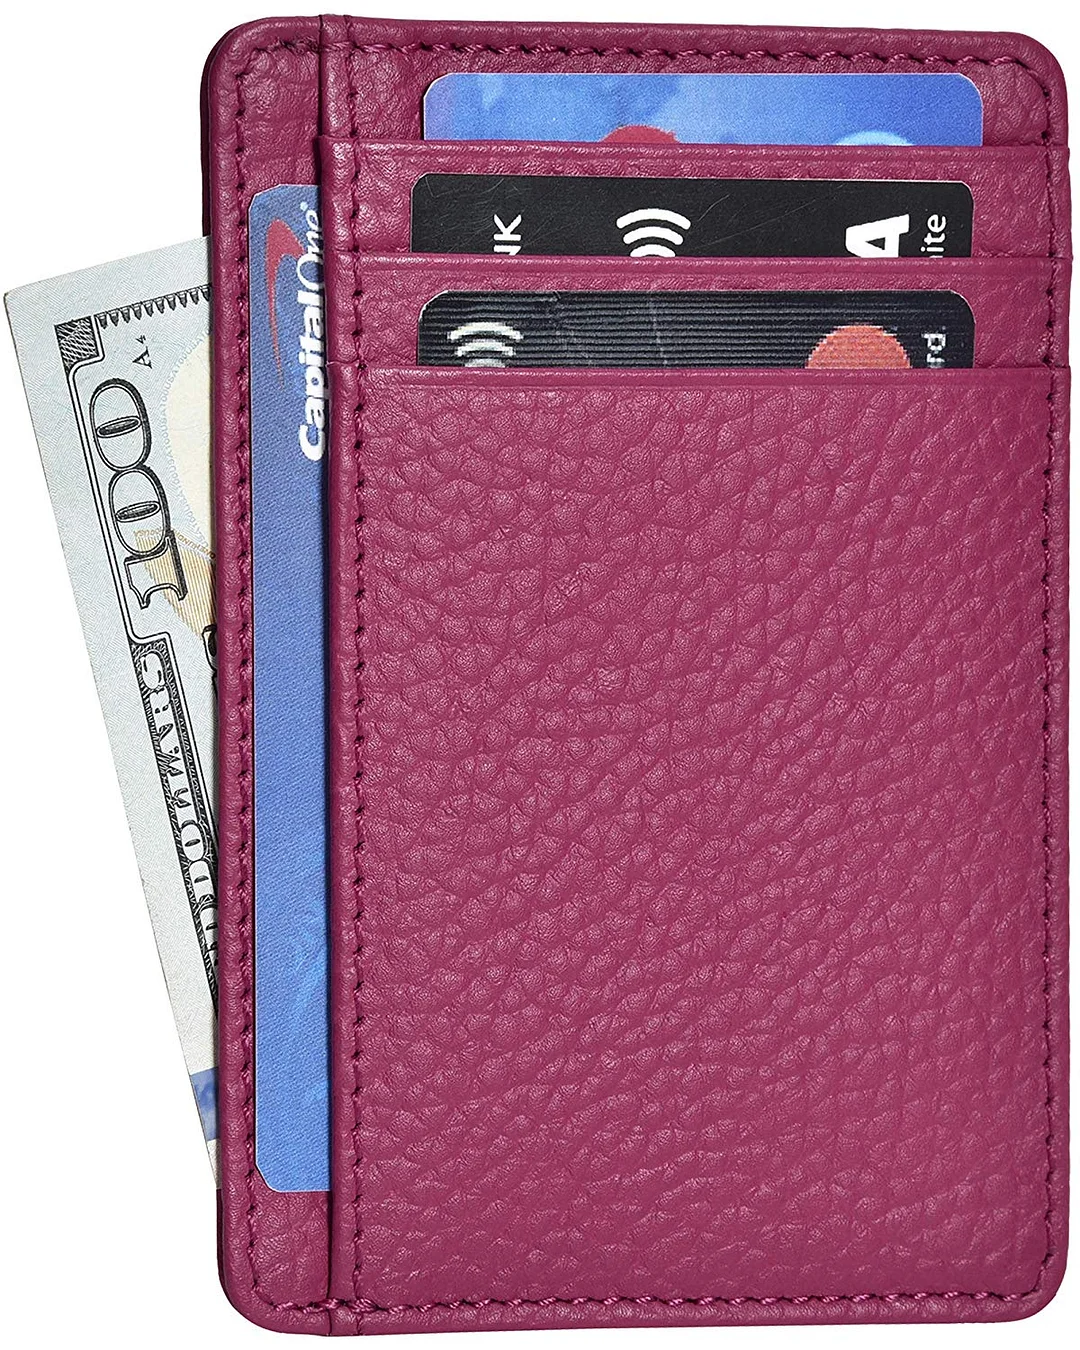 Clifton Heritage Leather Wallets for Women – RFID Blocking Ultra Slim Minimalist Front Pocket Wallet